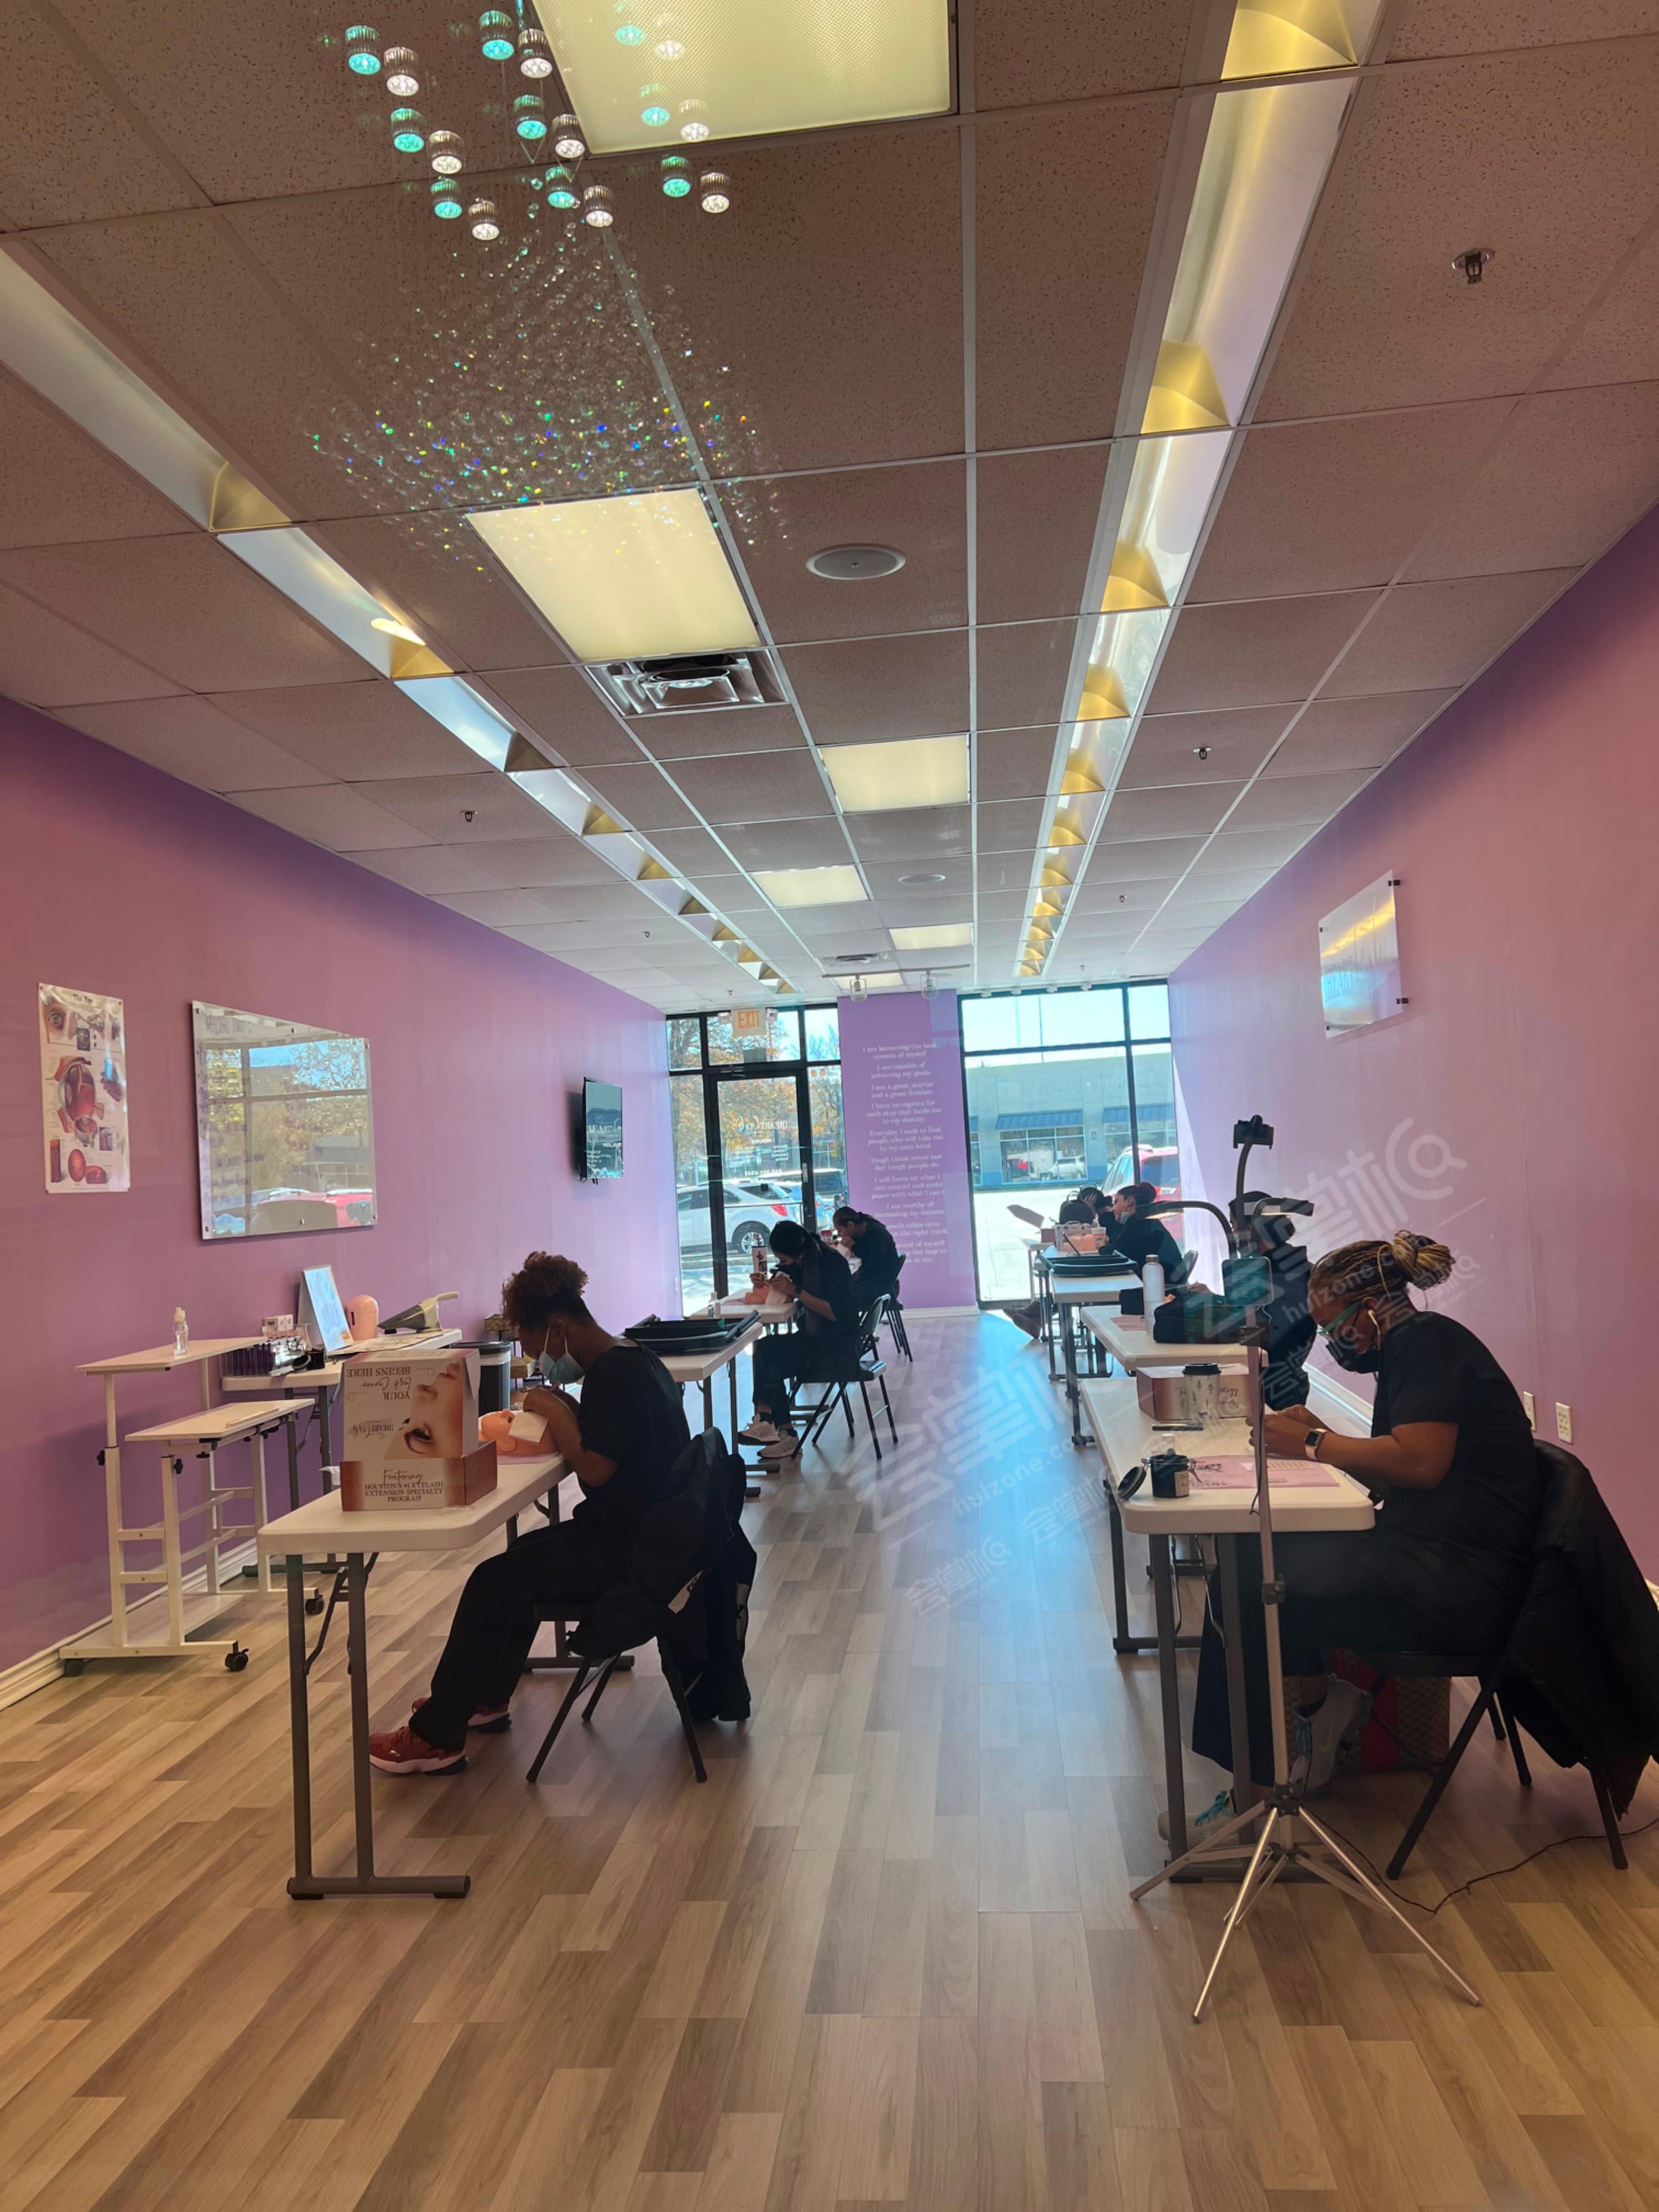 Houston’s Cosmetic Training Space